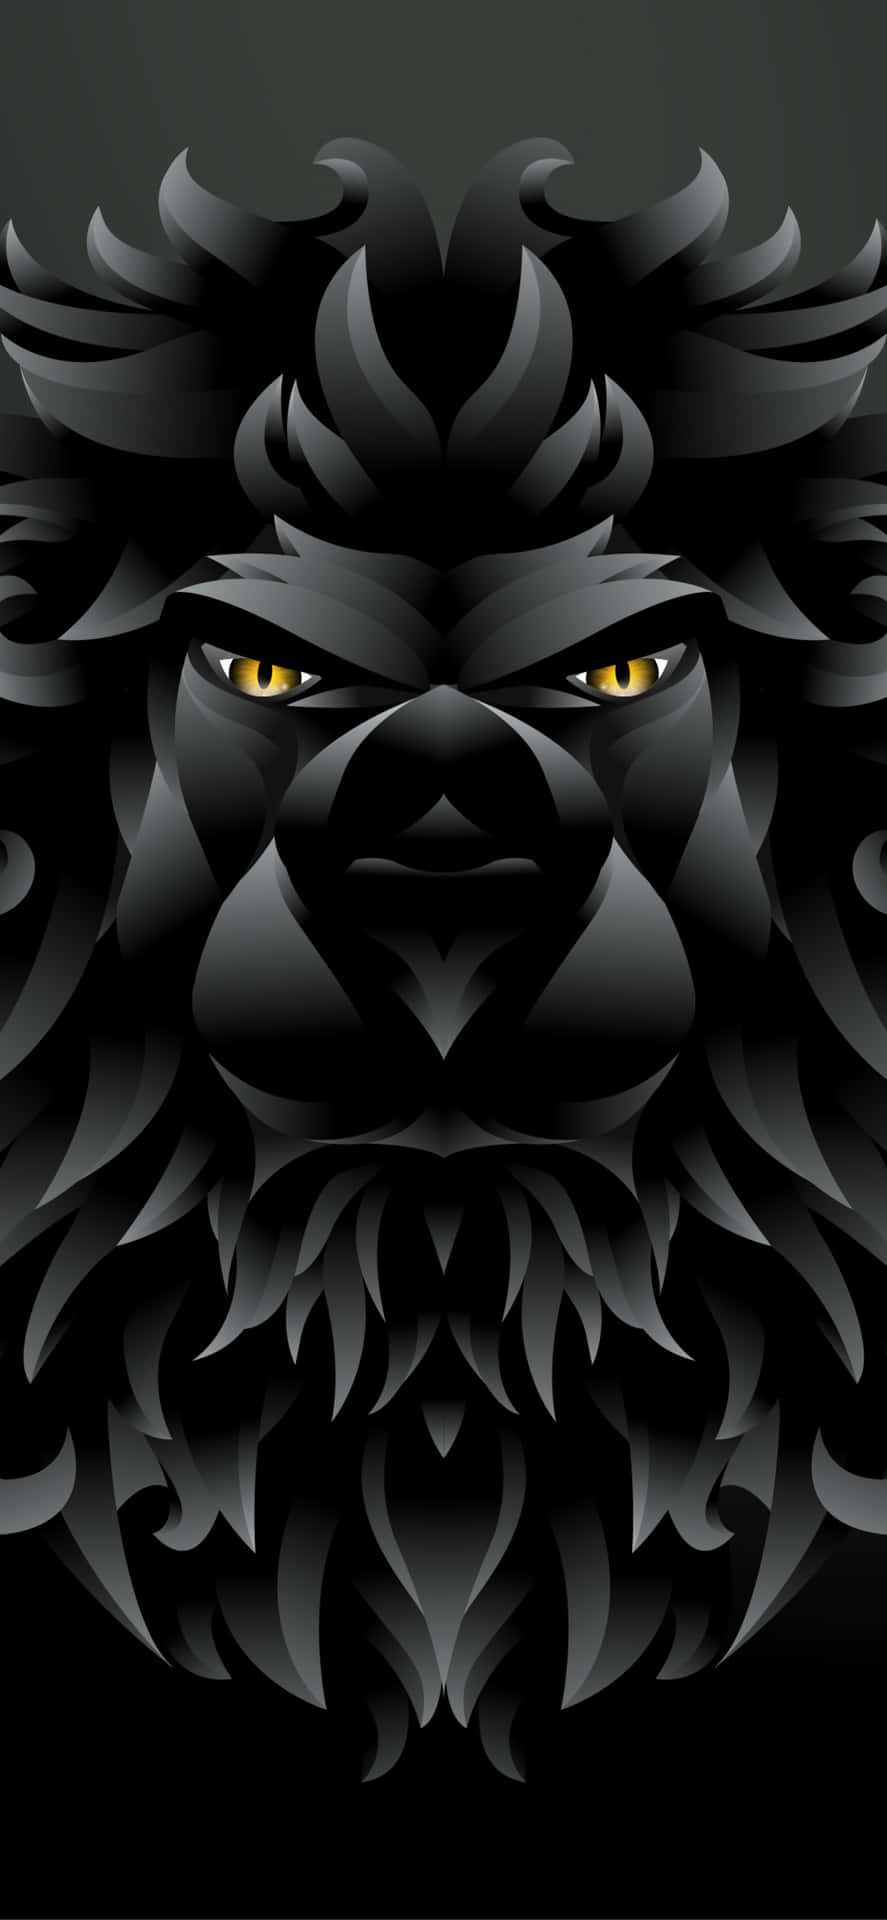 Majestic and regal - A black and white lion Wallpaper